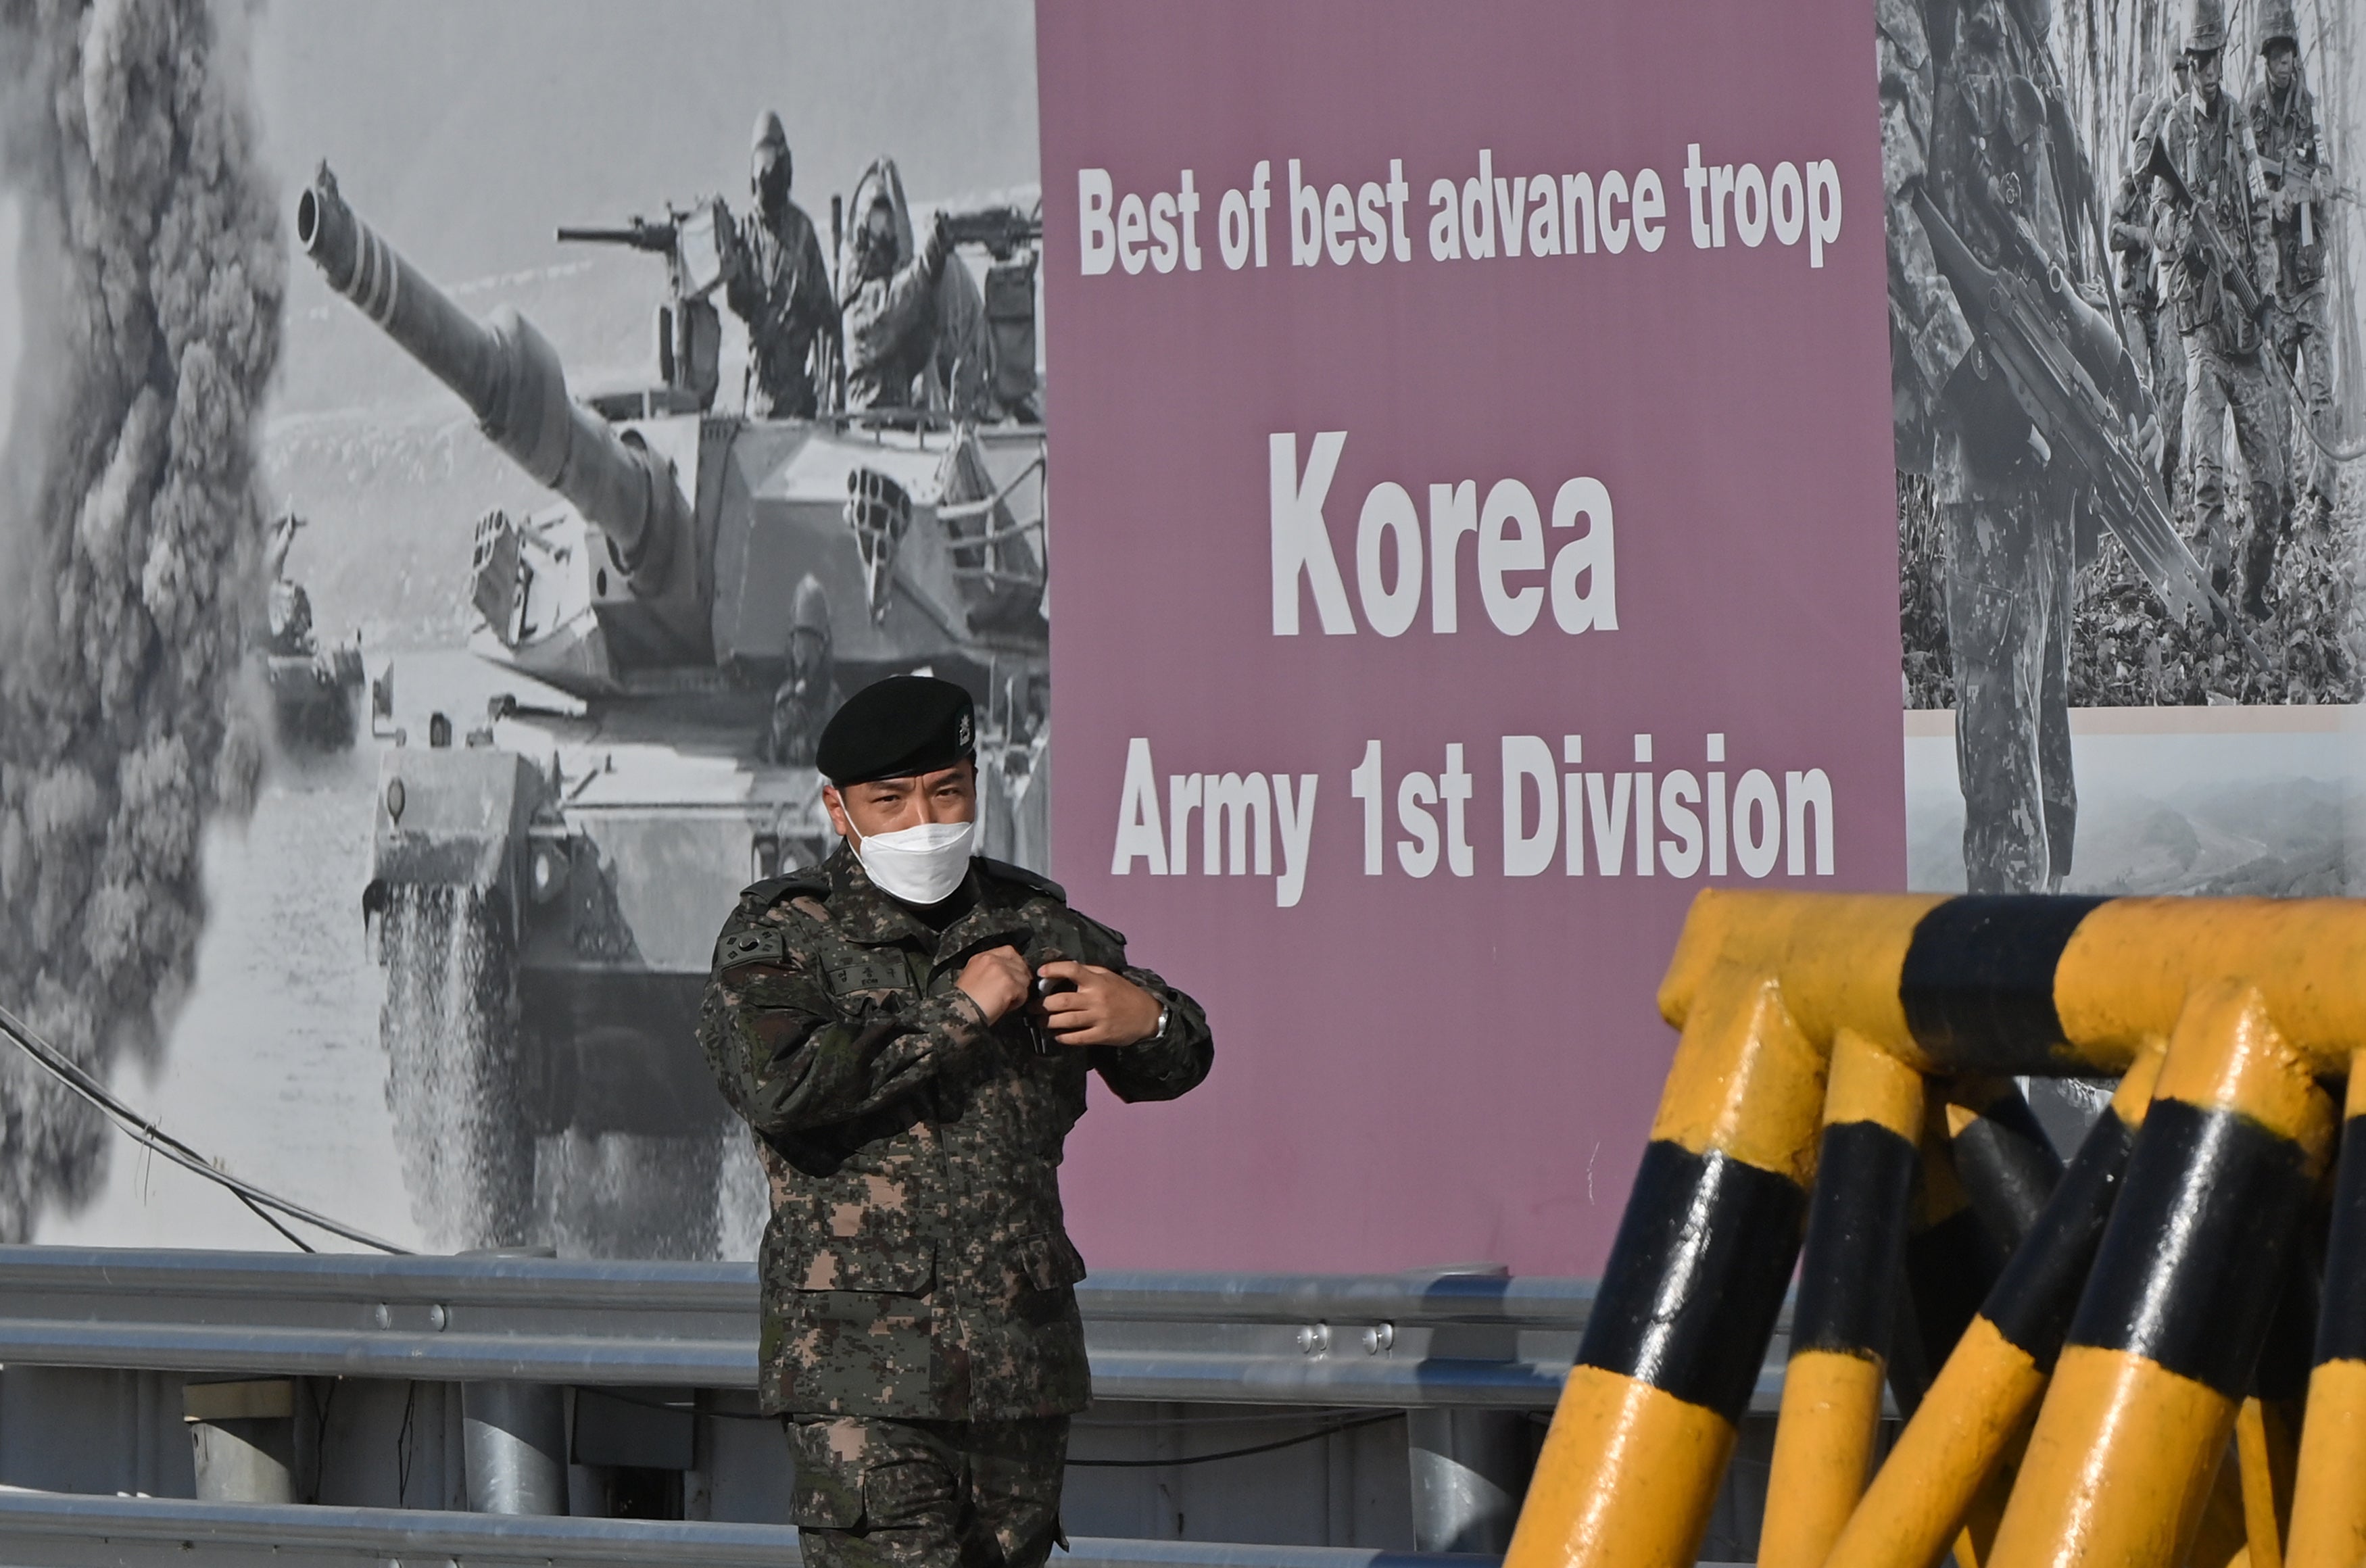 The demilitarised zone (DMZ) between North Korea and South Korea is one of the most heavily guarded areas in the world